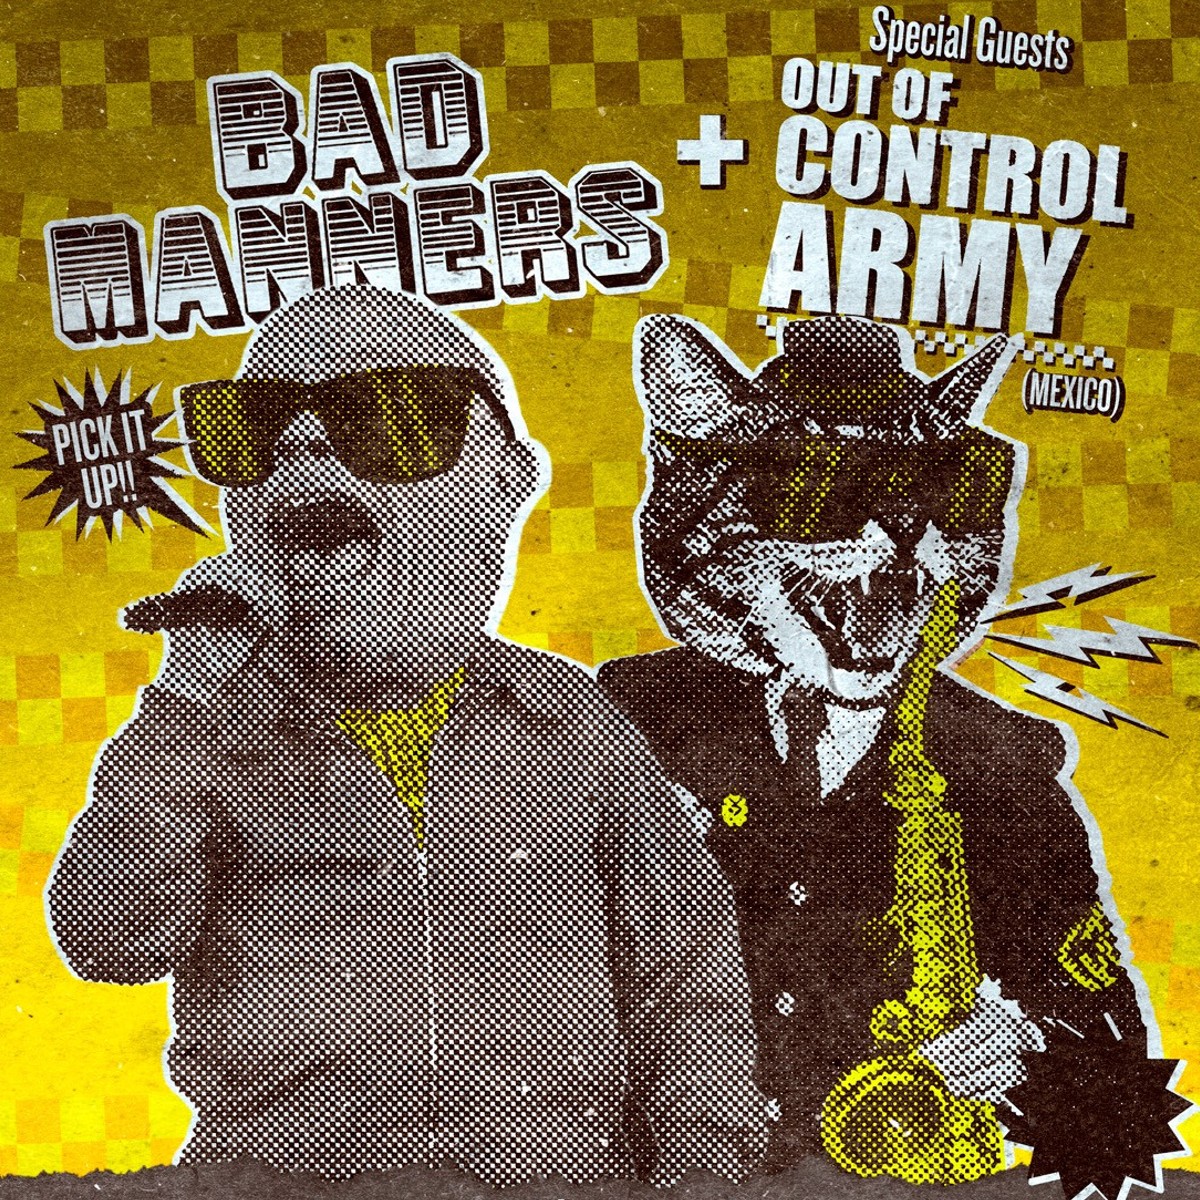 BAD MANNERS